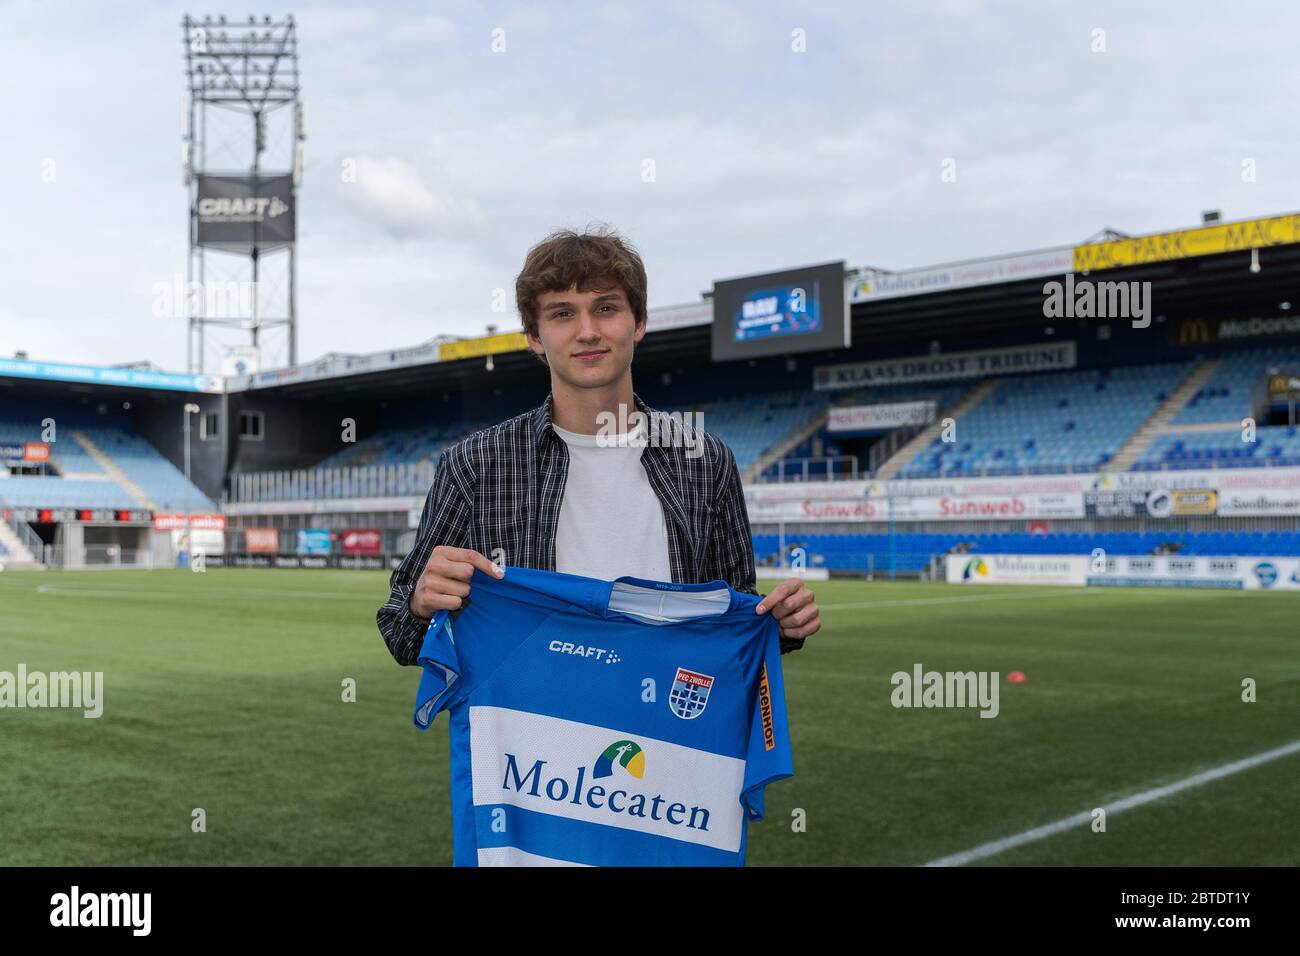 25 may 2022 Zwolle, Netherlands Rav van den Berg of PEC Zwolle pose with PEC Zwolle shirt after signing a contract until middle of 2022 on may 25 in Zwolle Stock Photo